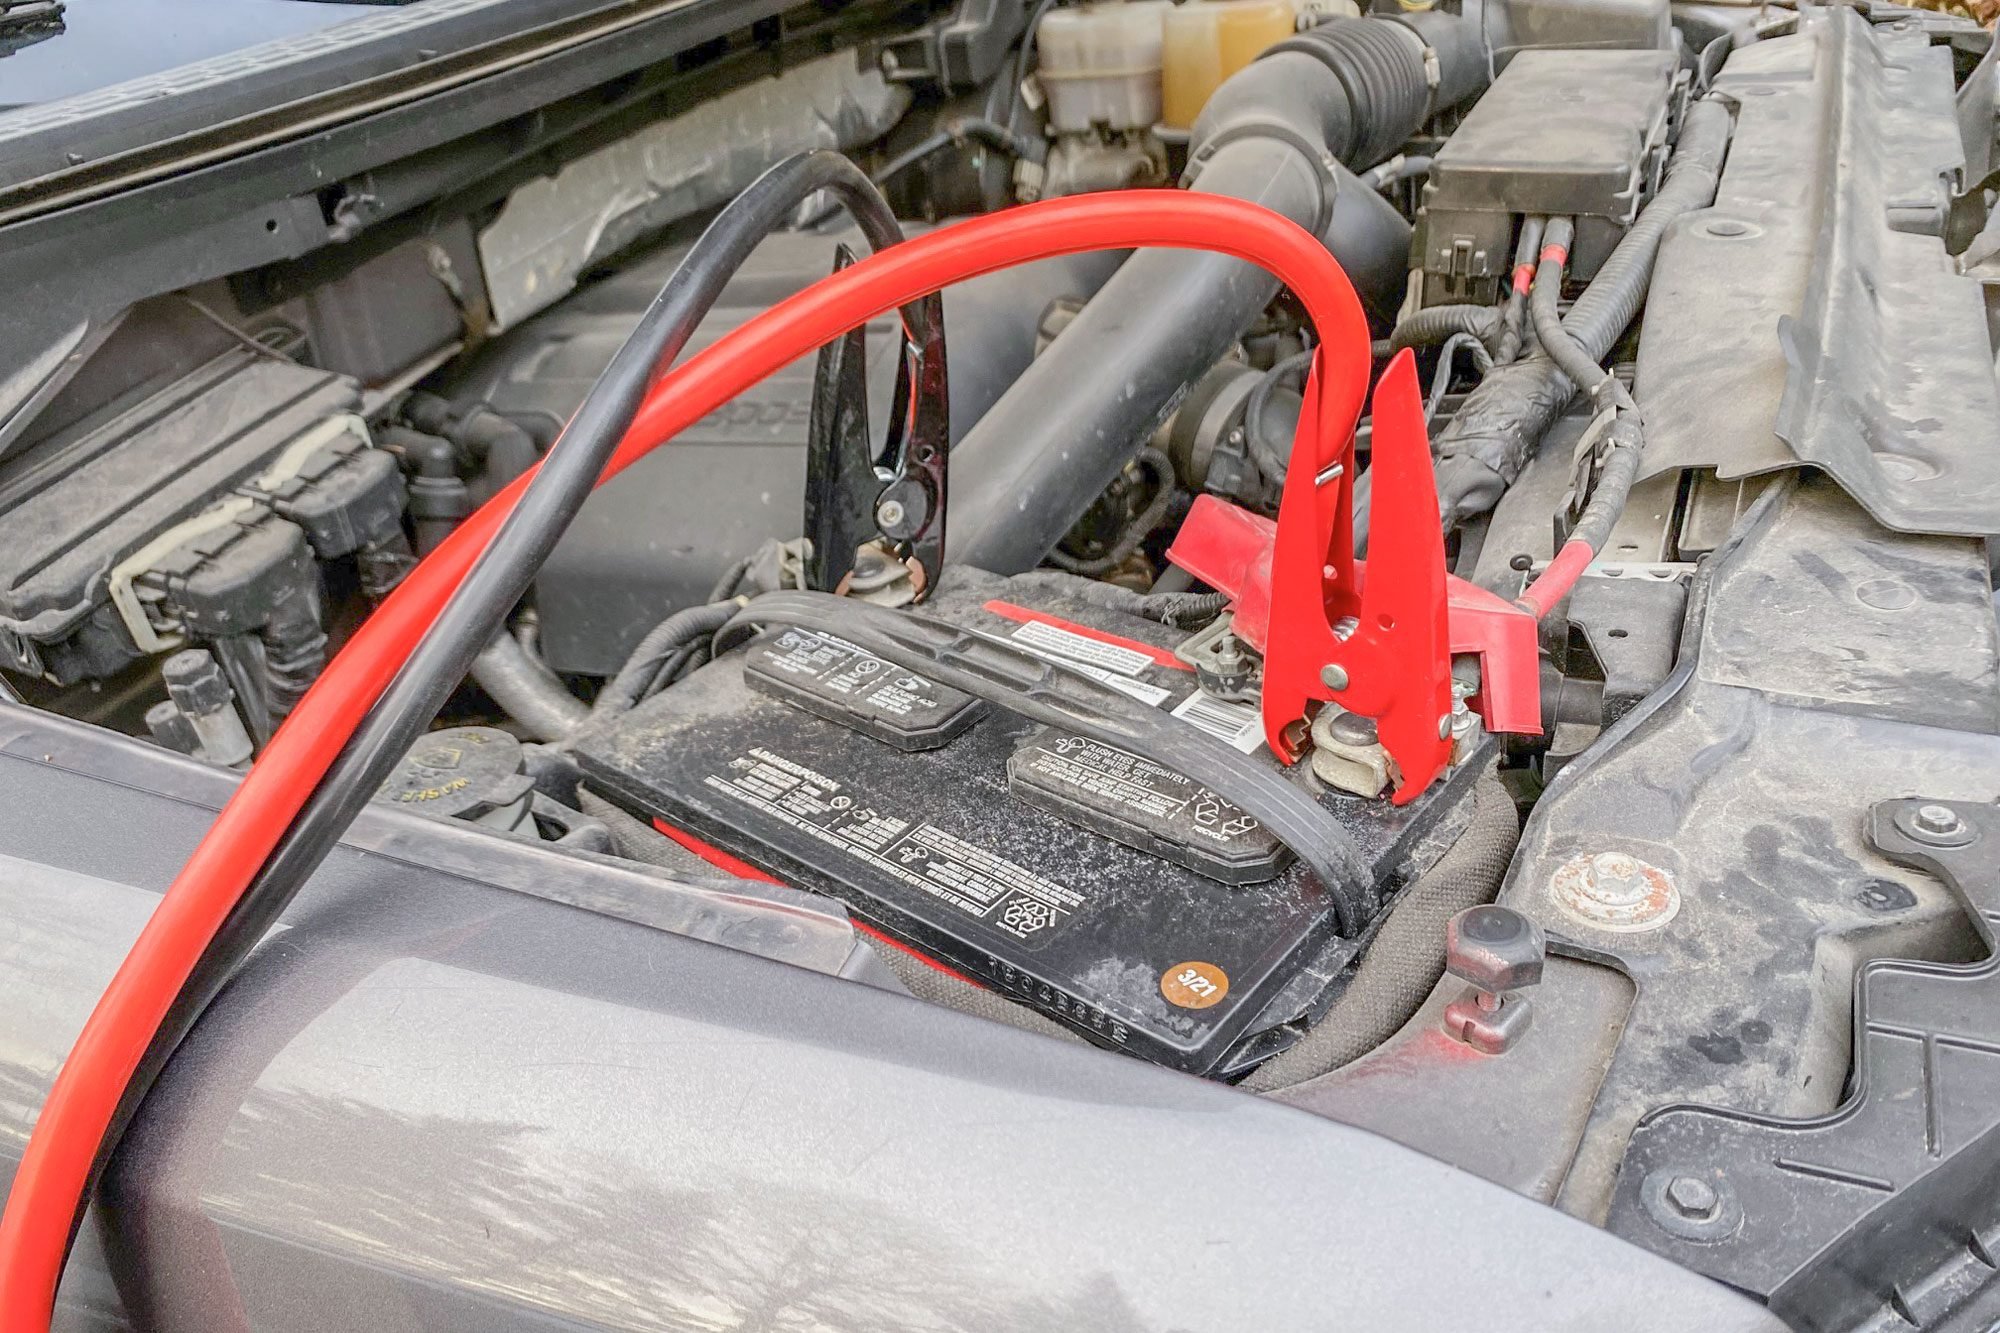 How to Jump a Car and Use Jumper Cables Safely